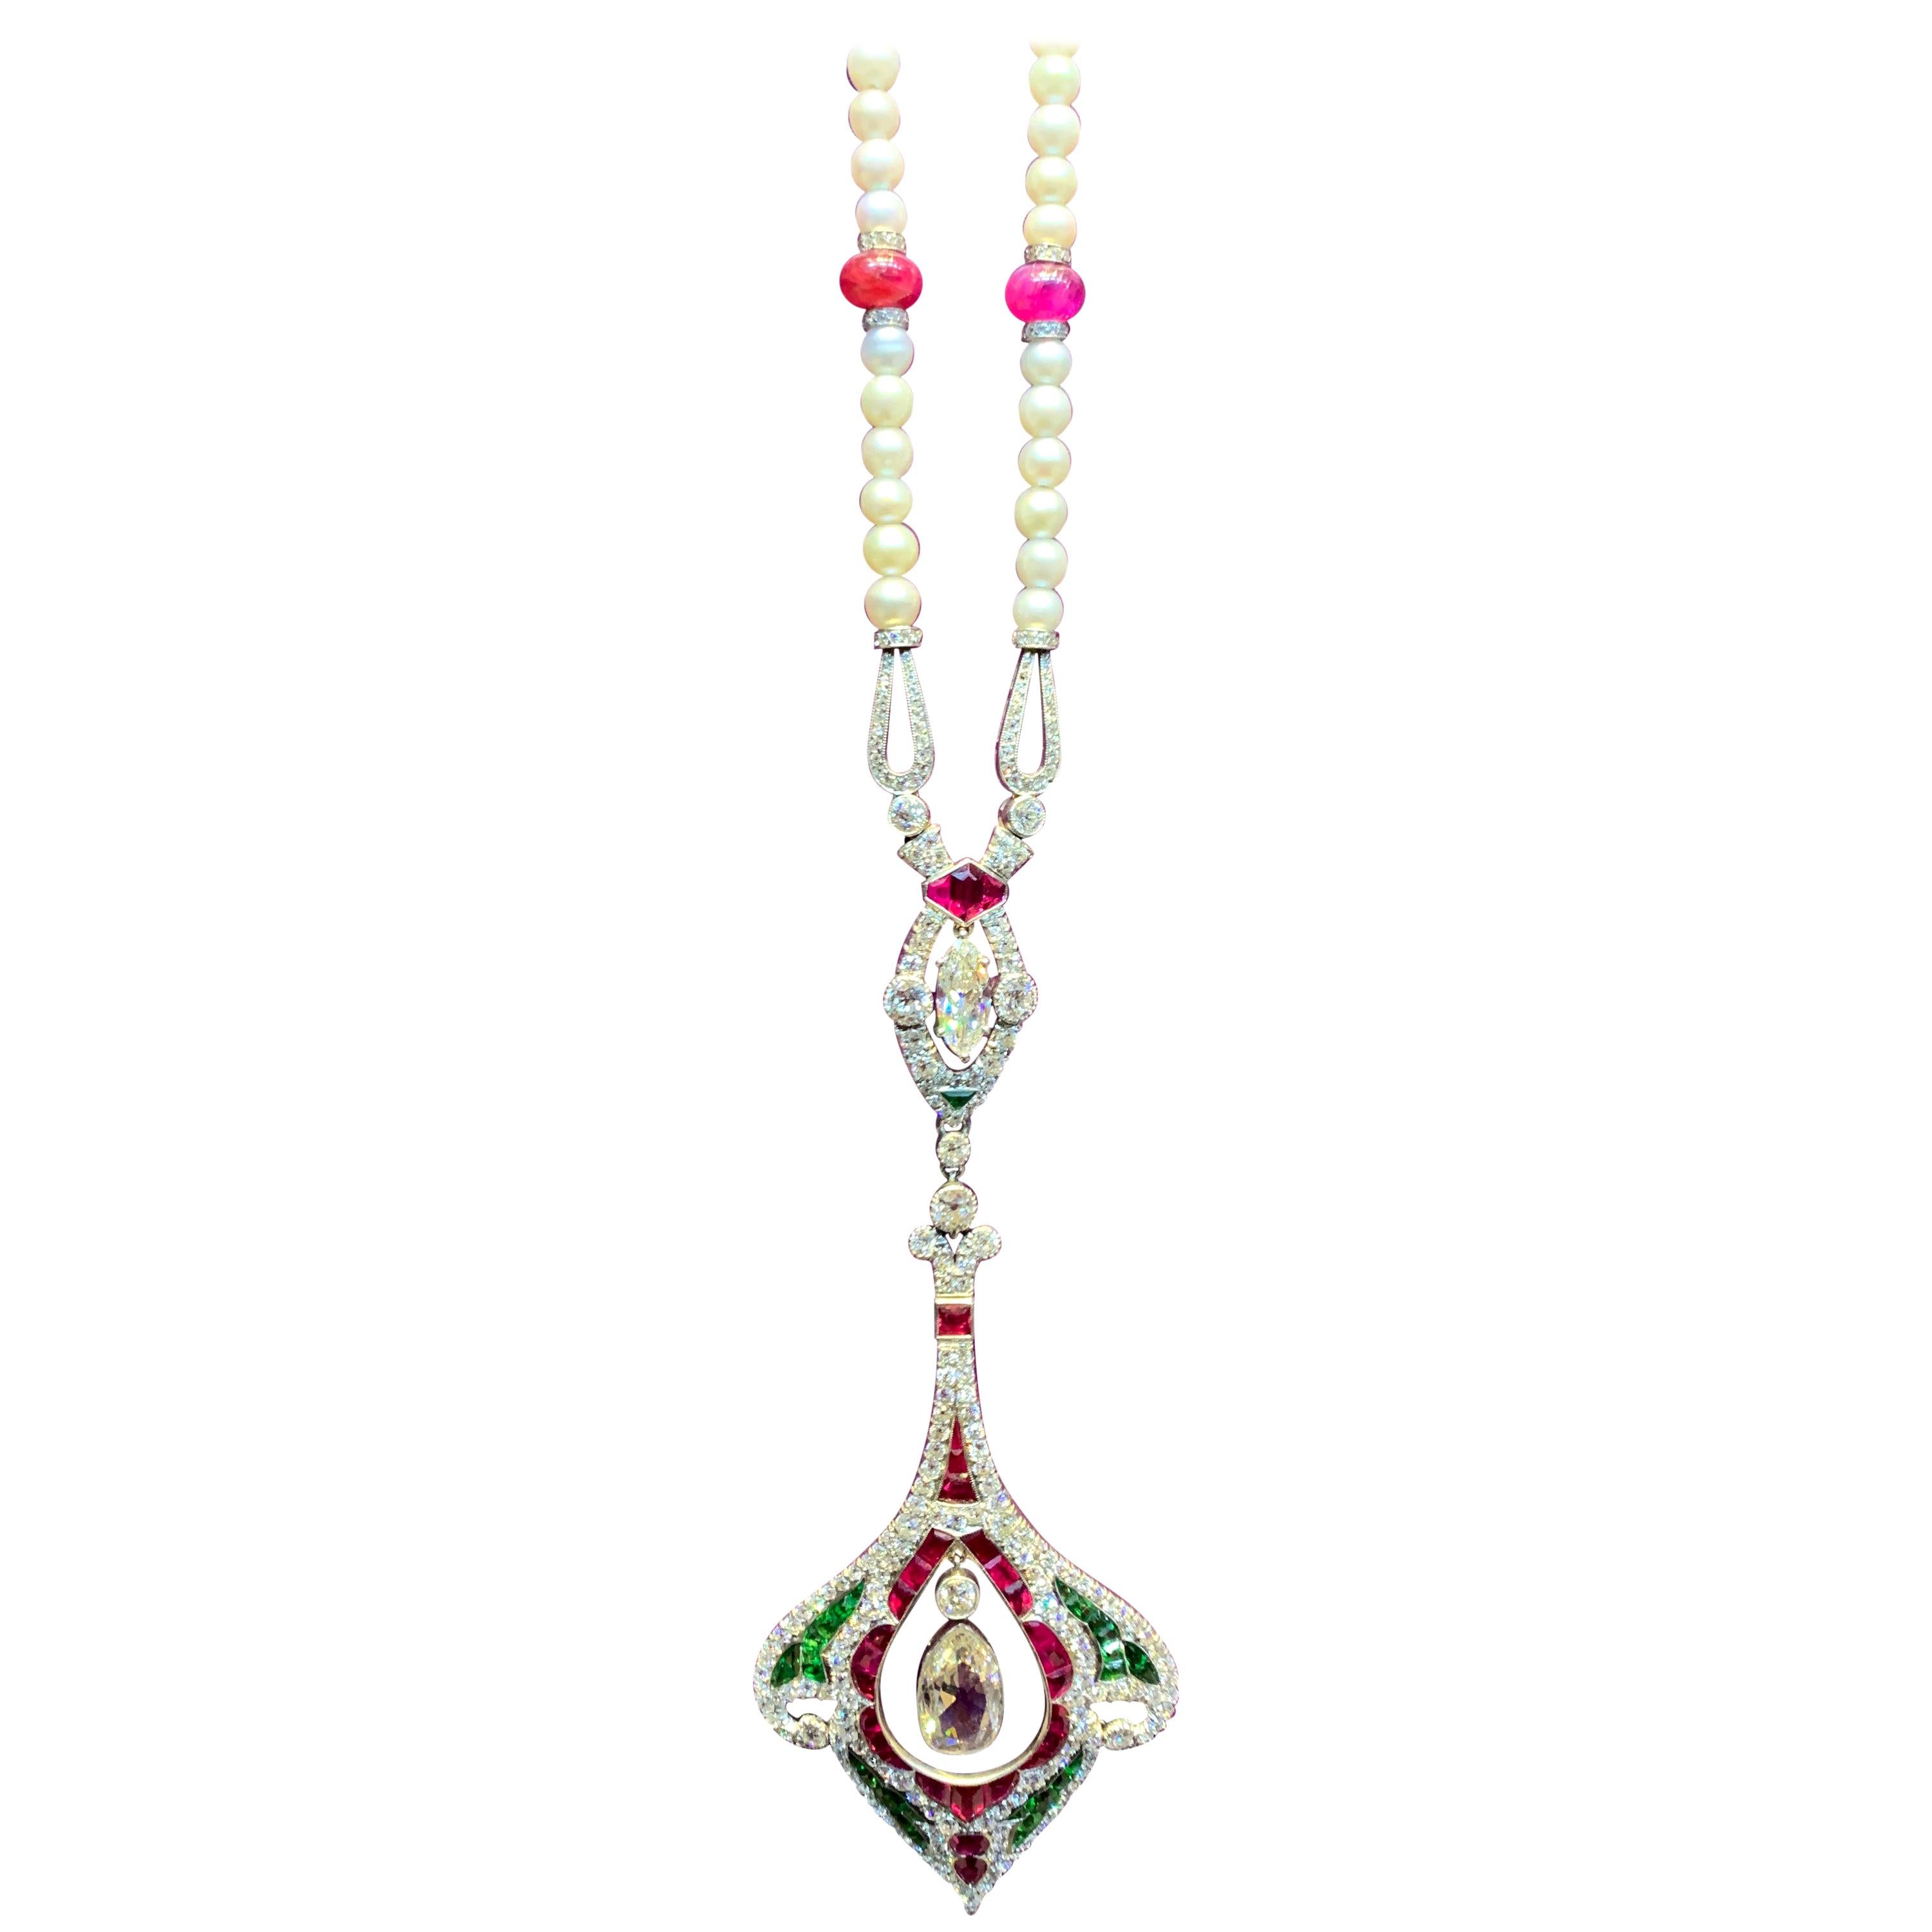 GIA Certified Natural Pearl, Multi Gem & Diamond Sautoir Necklace
Diamond Weight:  Center Marquise diamond weighs approx 2.1 cts 
Set with Rubies, antique cut diamonds, demantoid garnets, & a large rose cut diamond
Length: 24